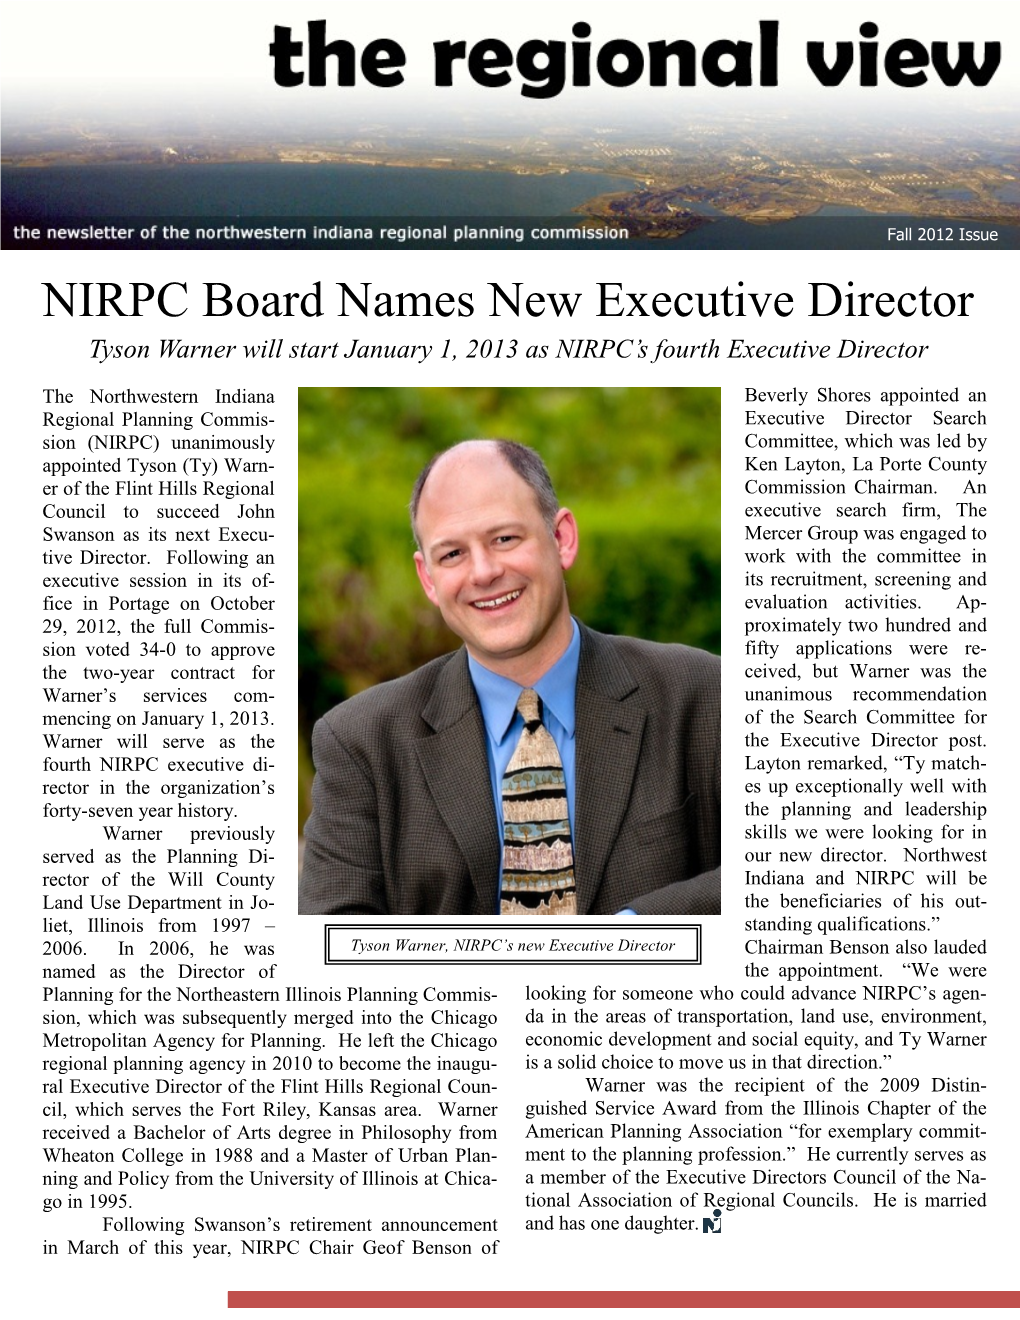 NIRPC Board Names New Executive Director Tyson Warner Will Start January 1, 2013 As NIRPC’S Fourth Executive Director